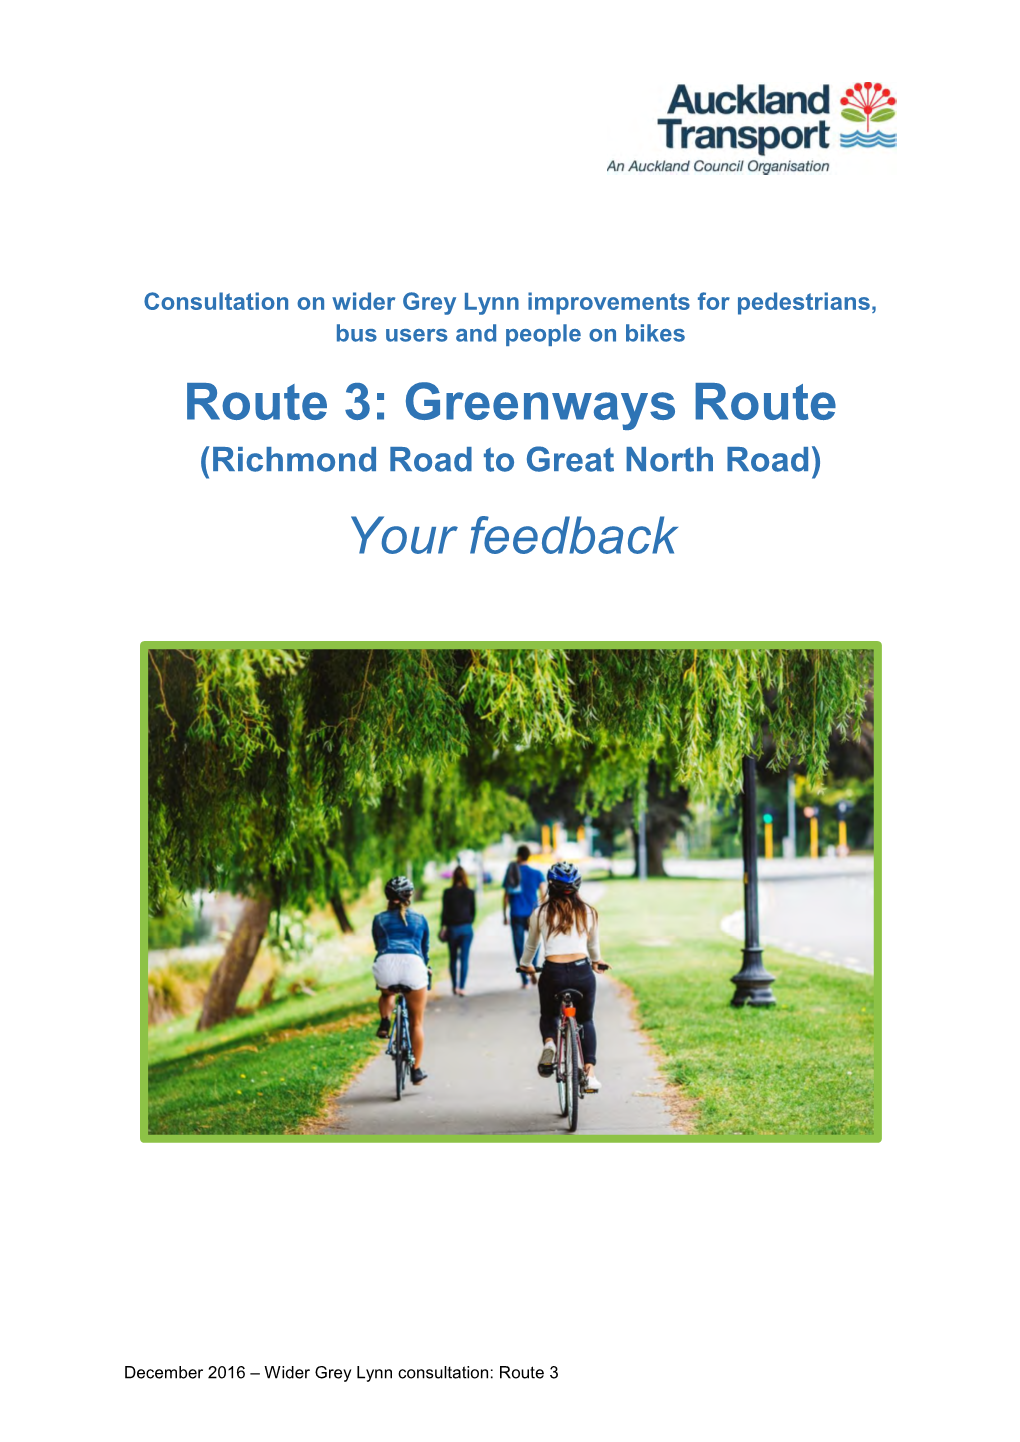 Route 3: Greenways Route Your Feedback